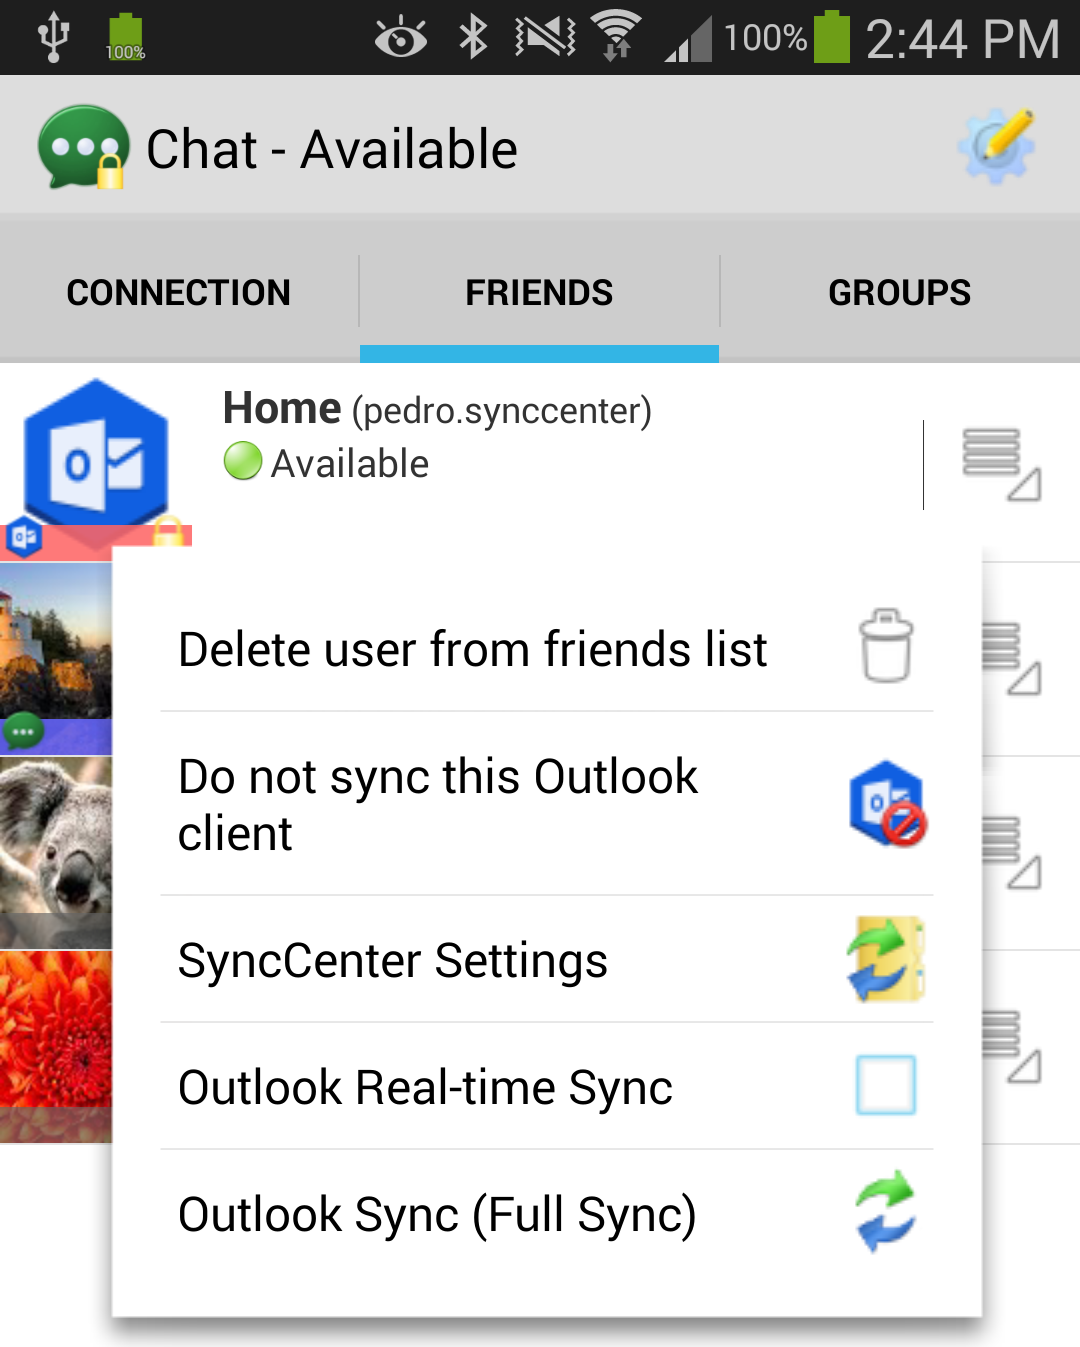 Start Outlook Sync from Chat screen